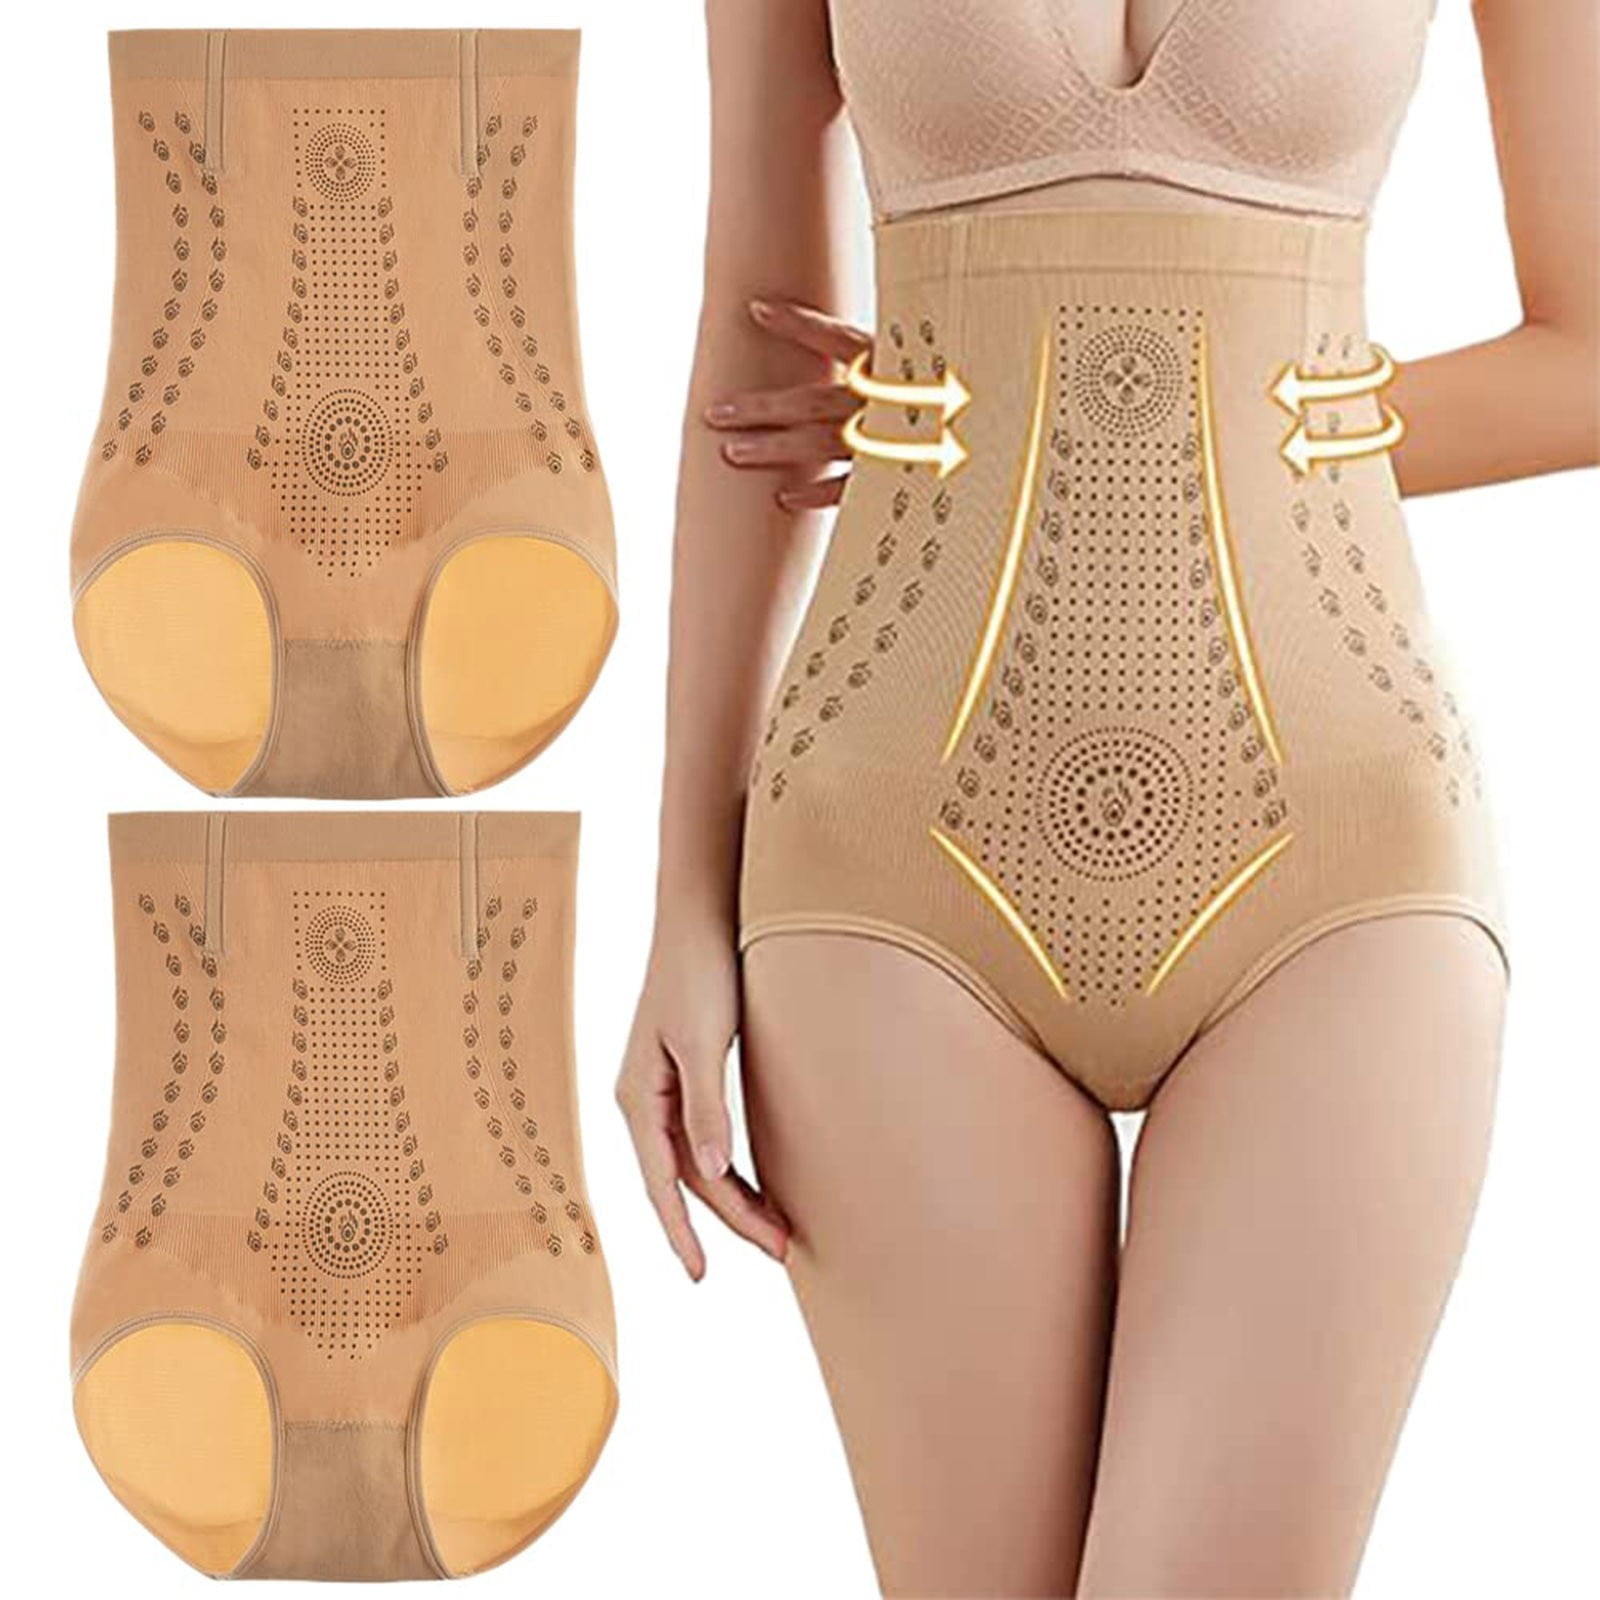 adviicd Same Day Lingerie for Women Ladies Wrap Underwear With Underwire  Legs Ring Mesh Suit Lingerie